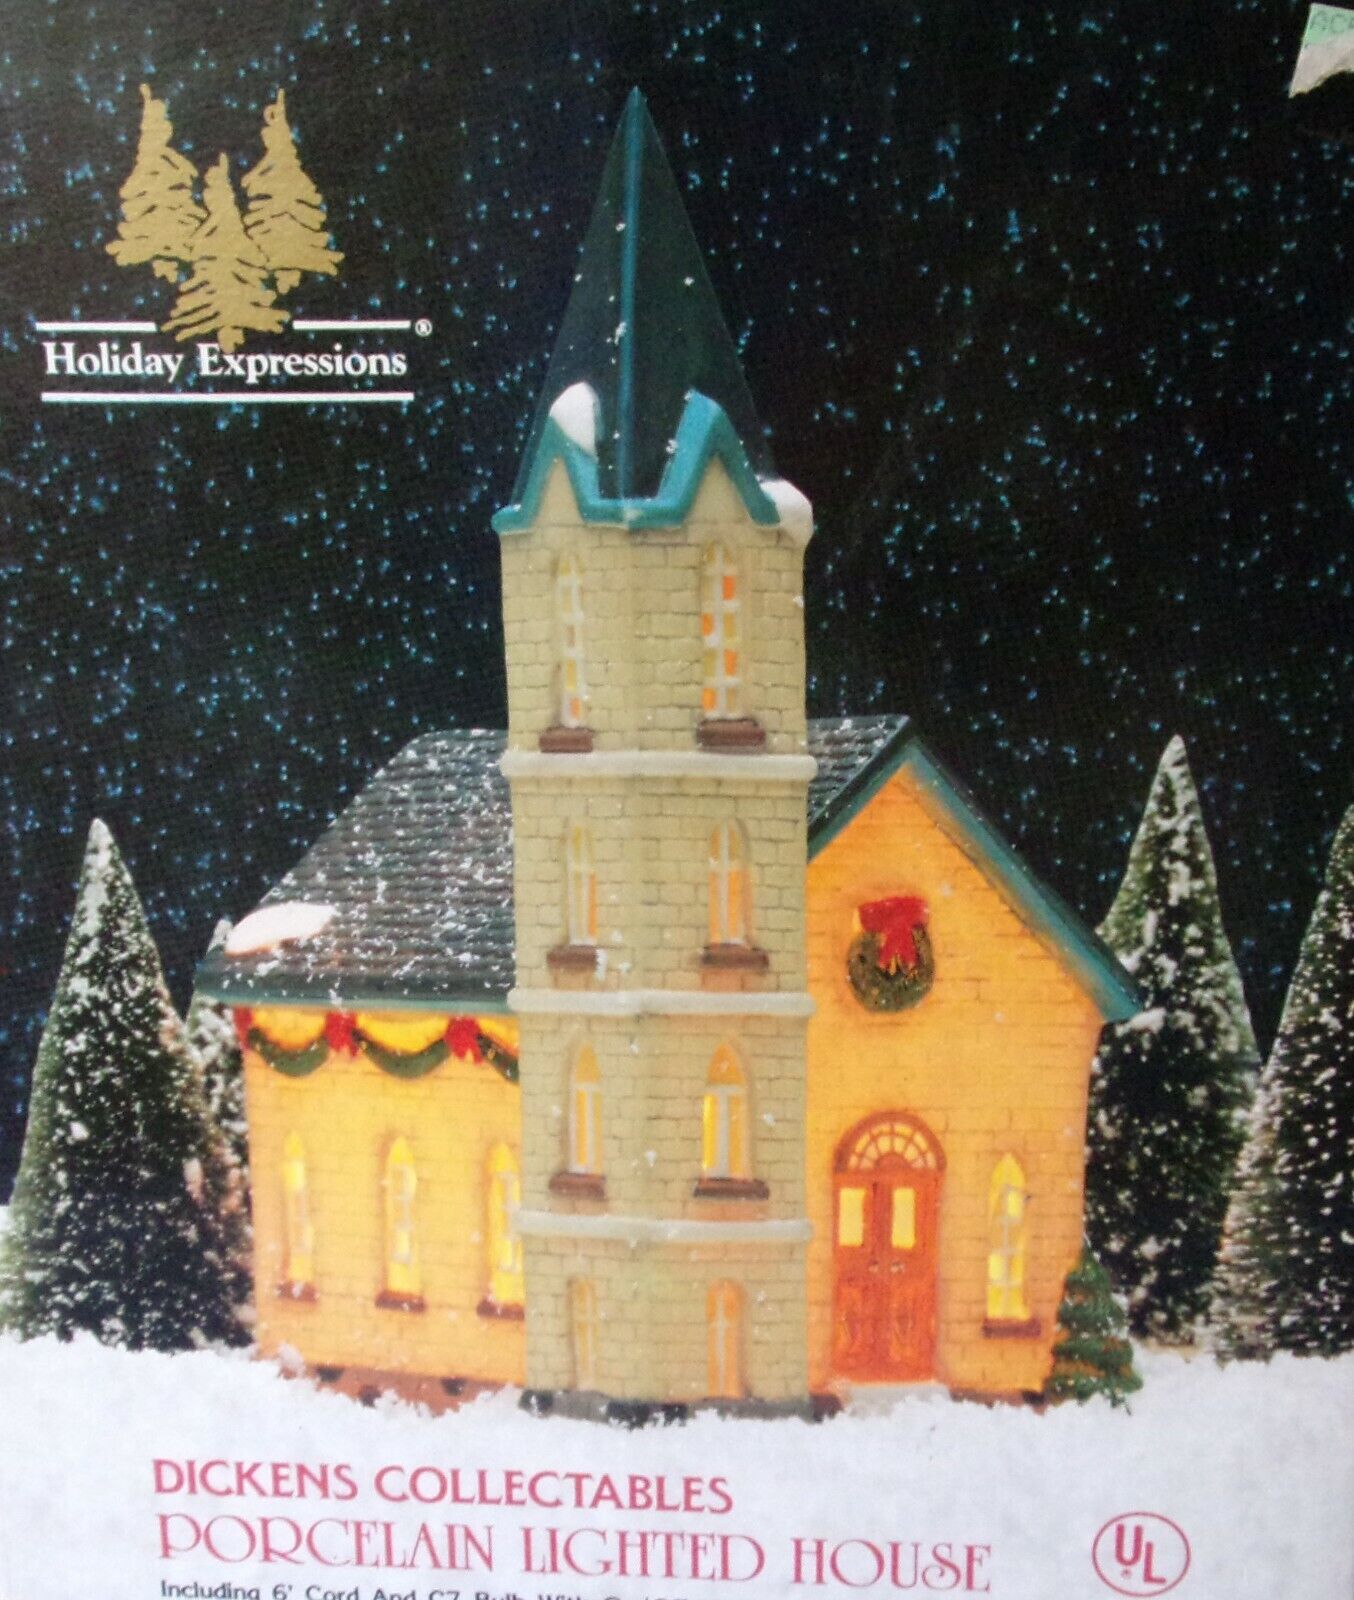 Dickens Collectibles CHURCH Porcelain Lighted House Holiday Expressions w/ Box